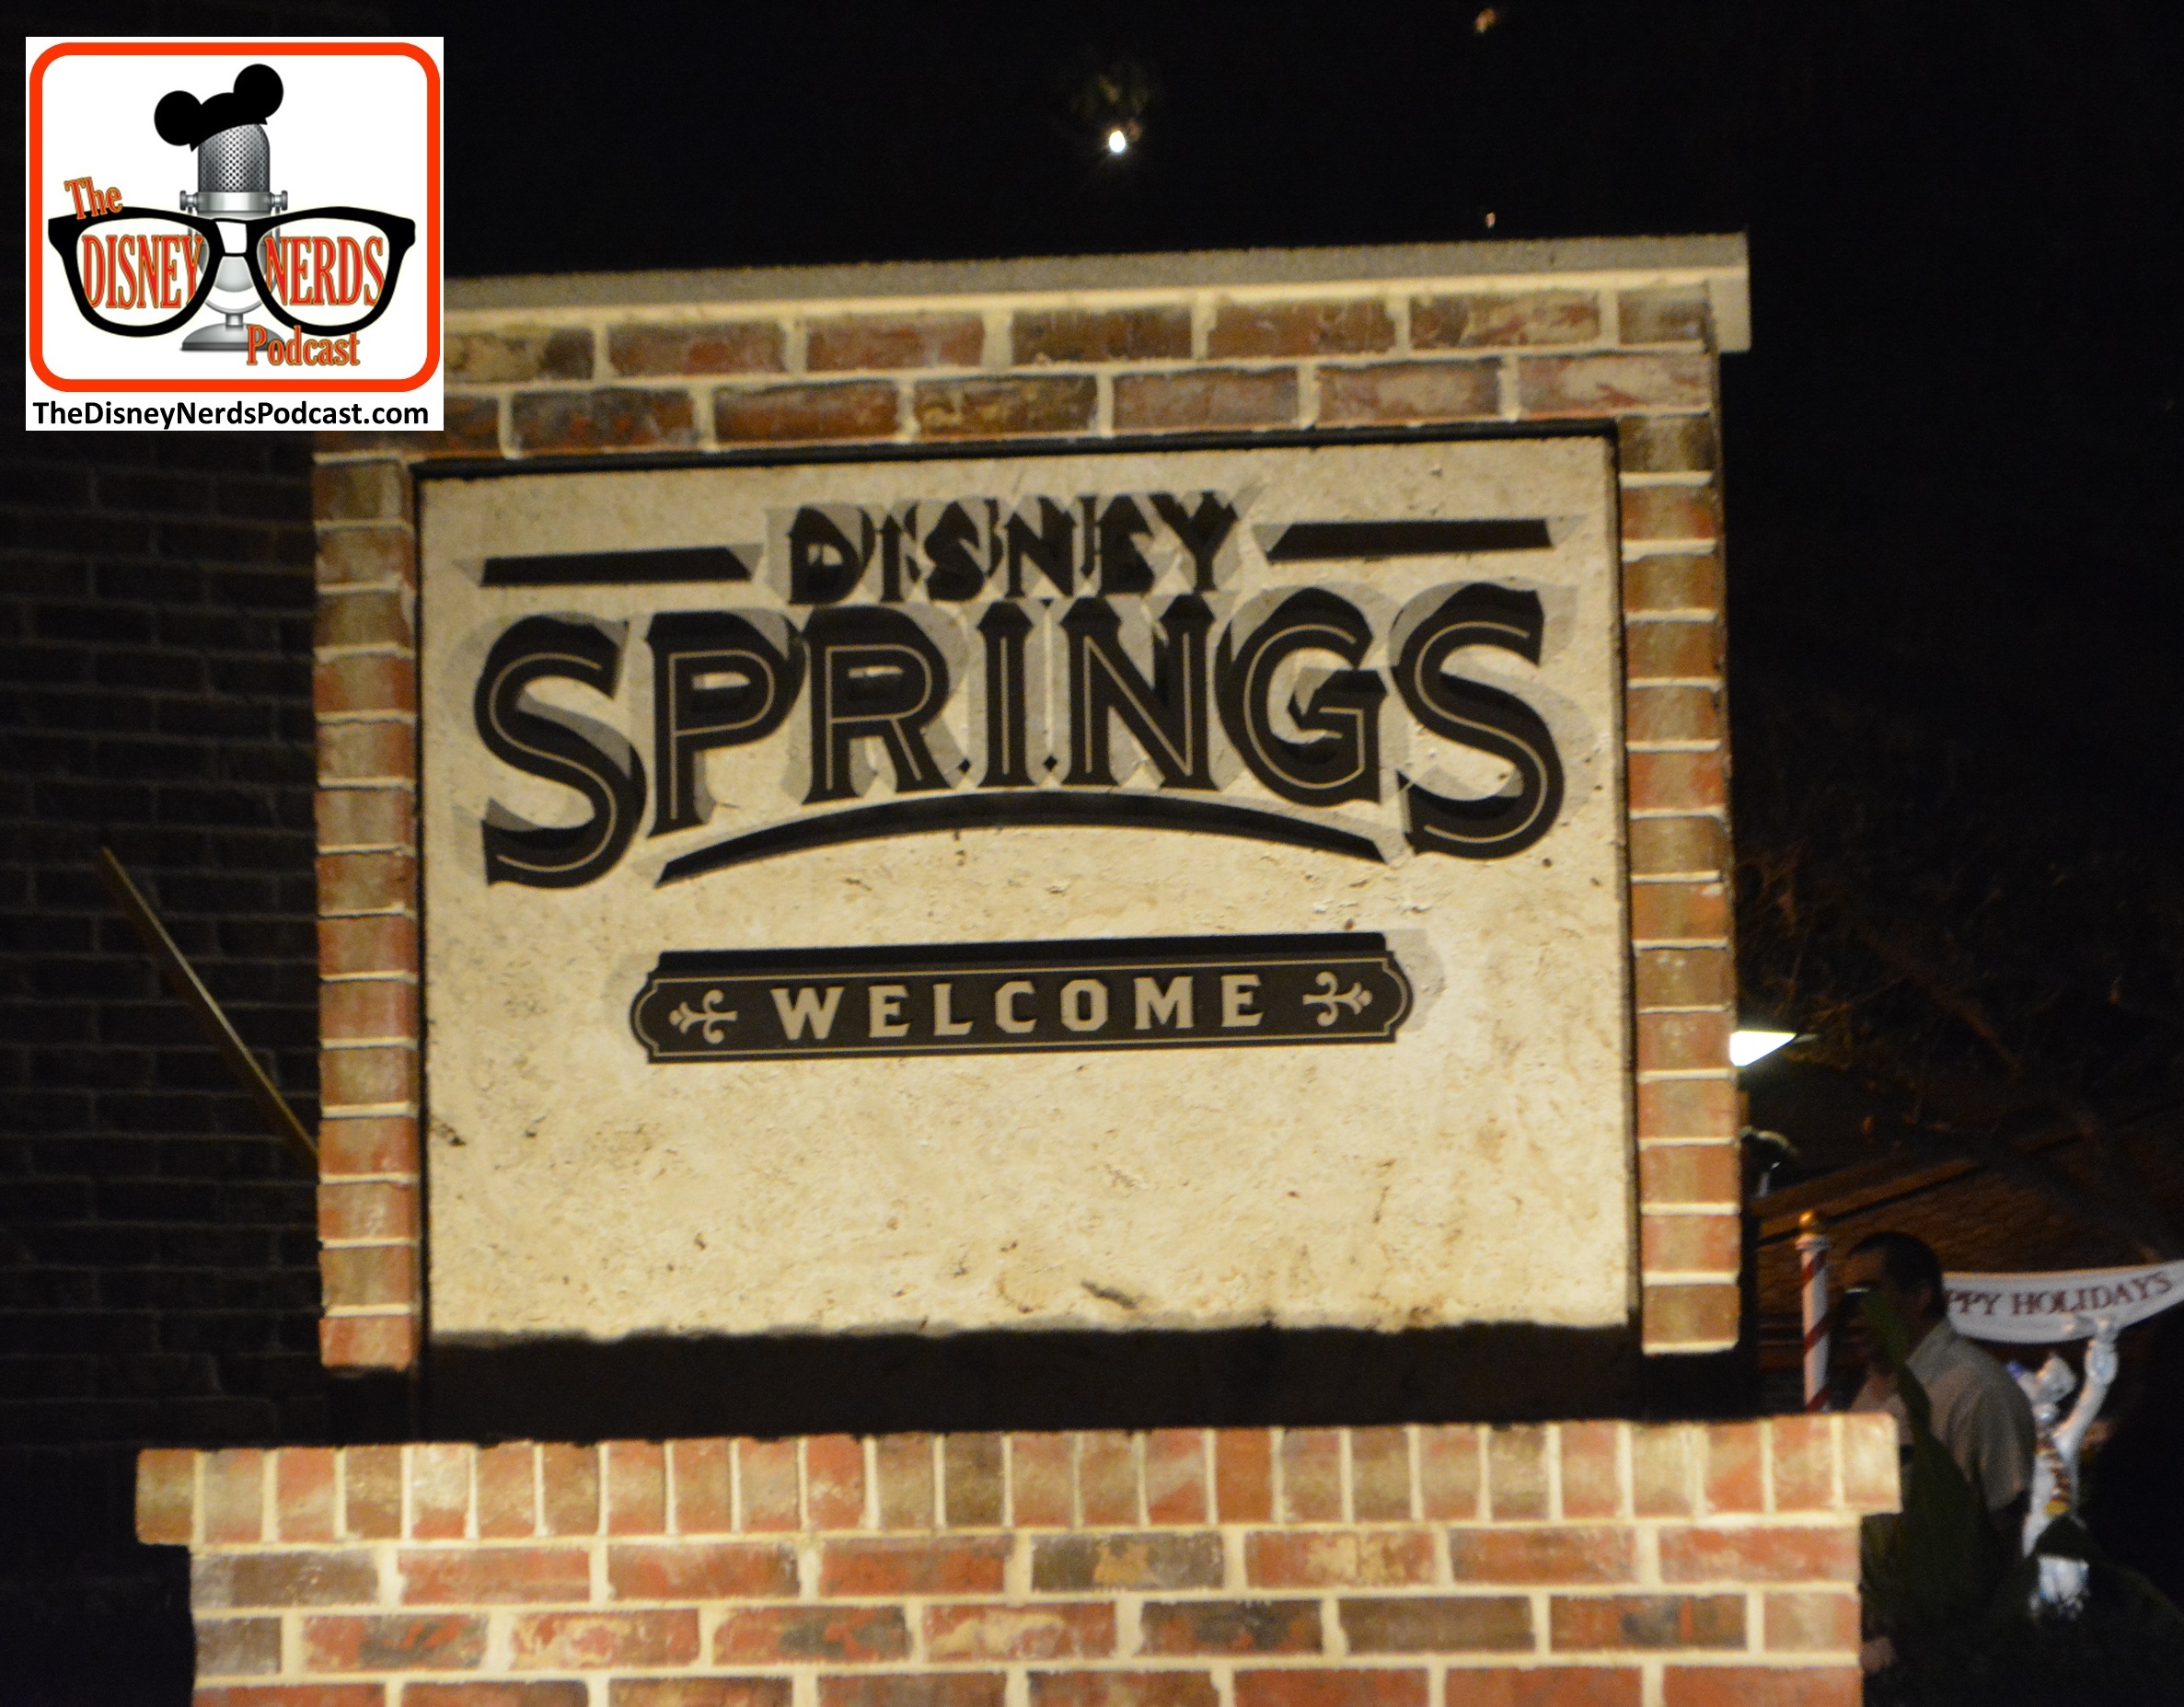 2015-12 - Disney Springs - All references to Downtown Disney have been removed